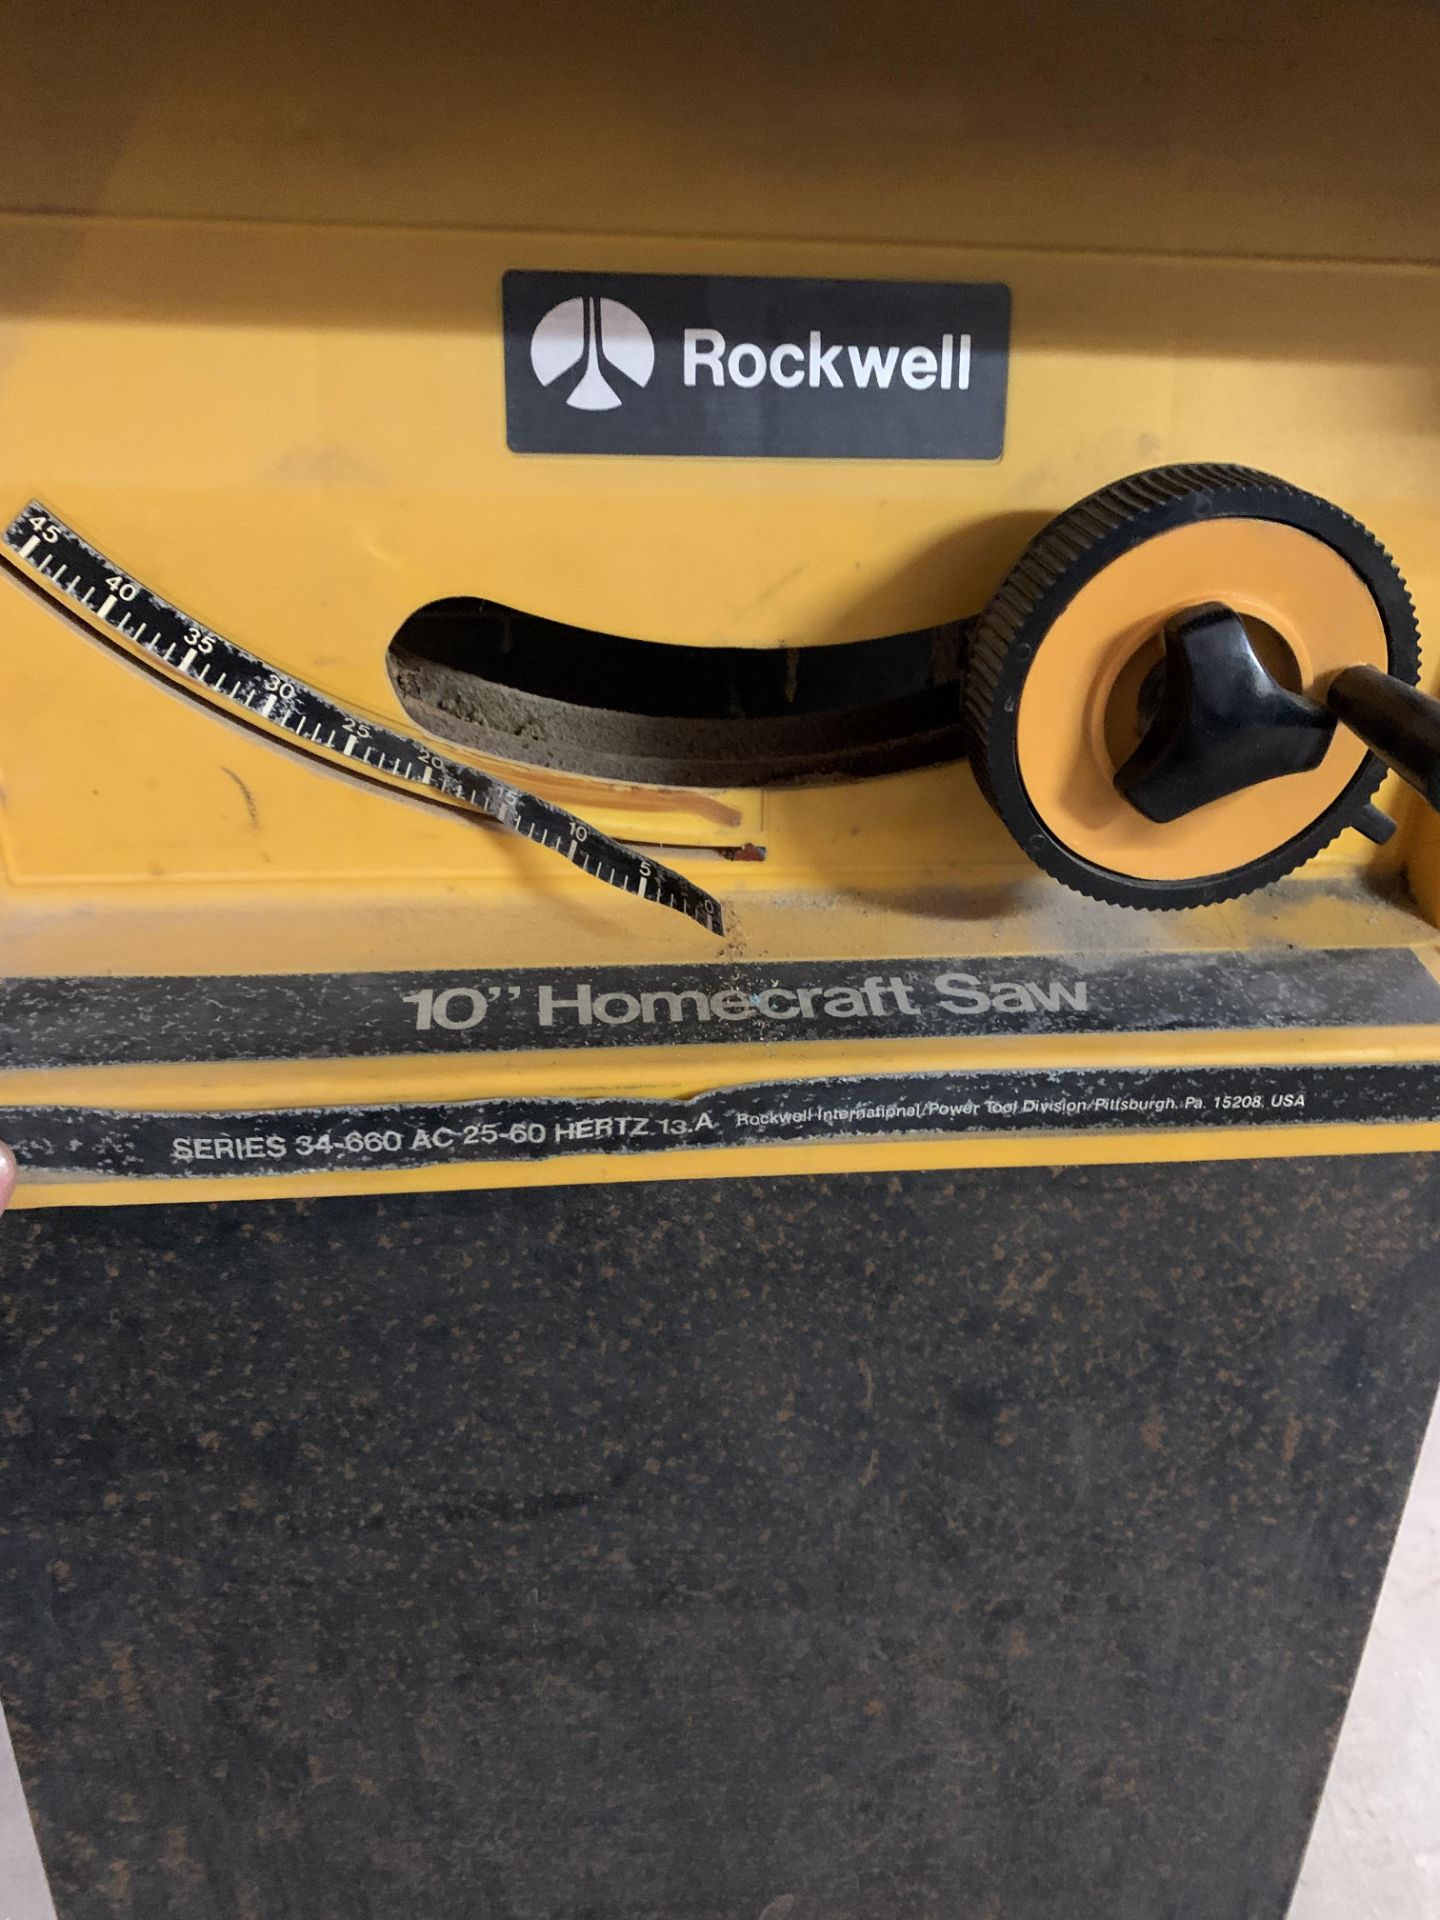 ROCKWELL 10" Homecraft Table Saw - Image 5 of 10